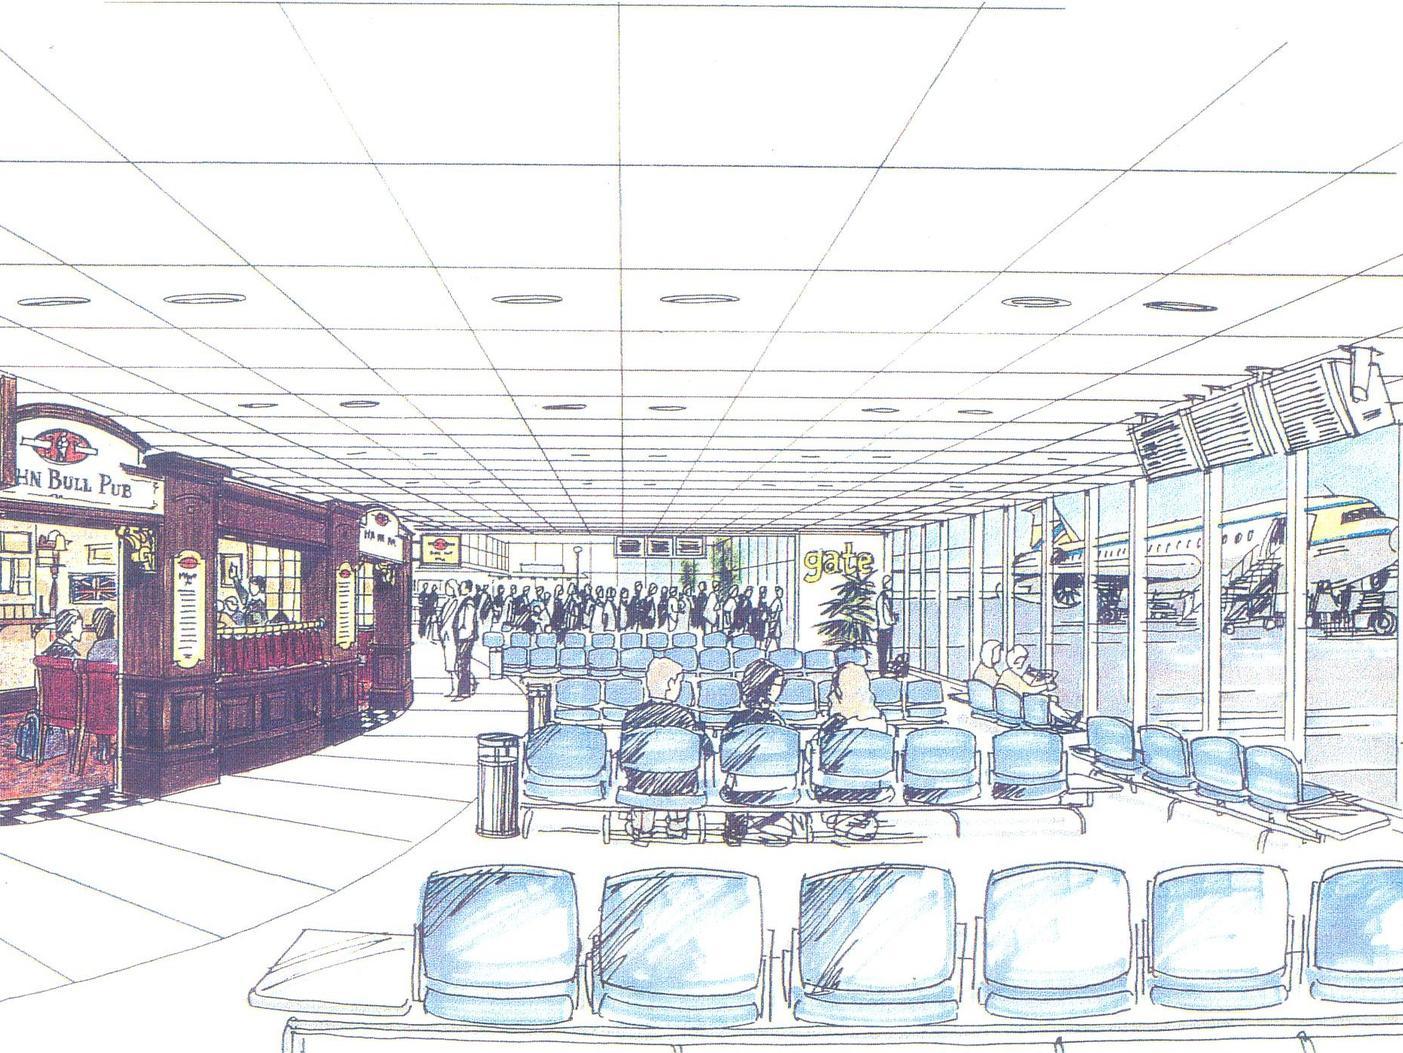 An artists impression of the departure lounge and John Bull pub. Pint at 7am anyone?